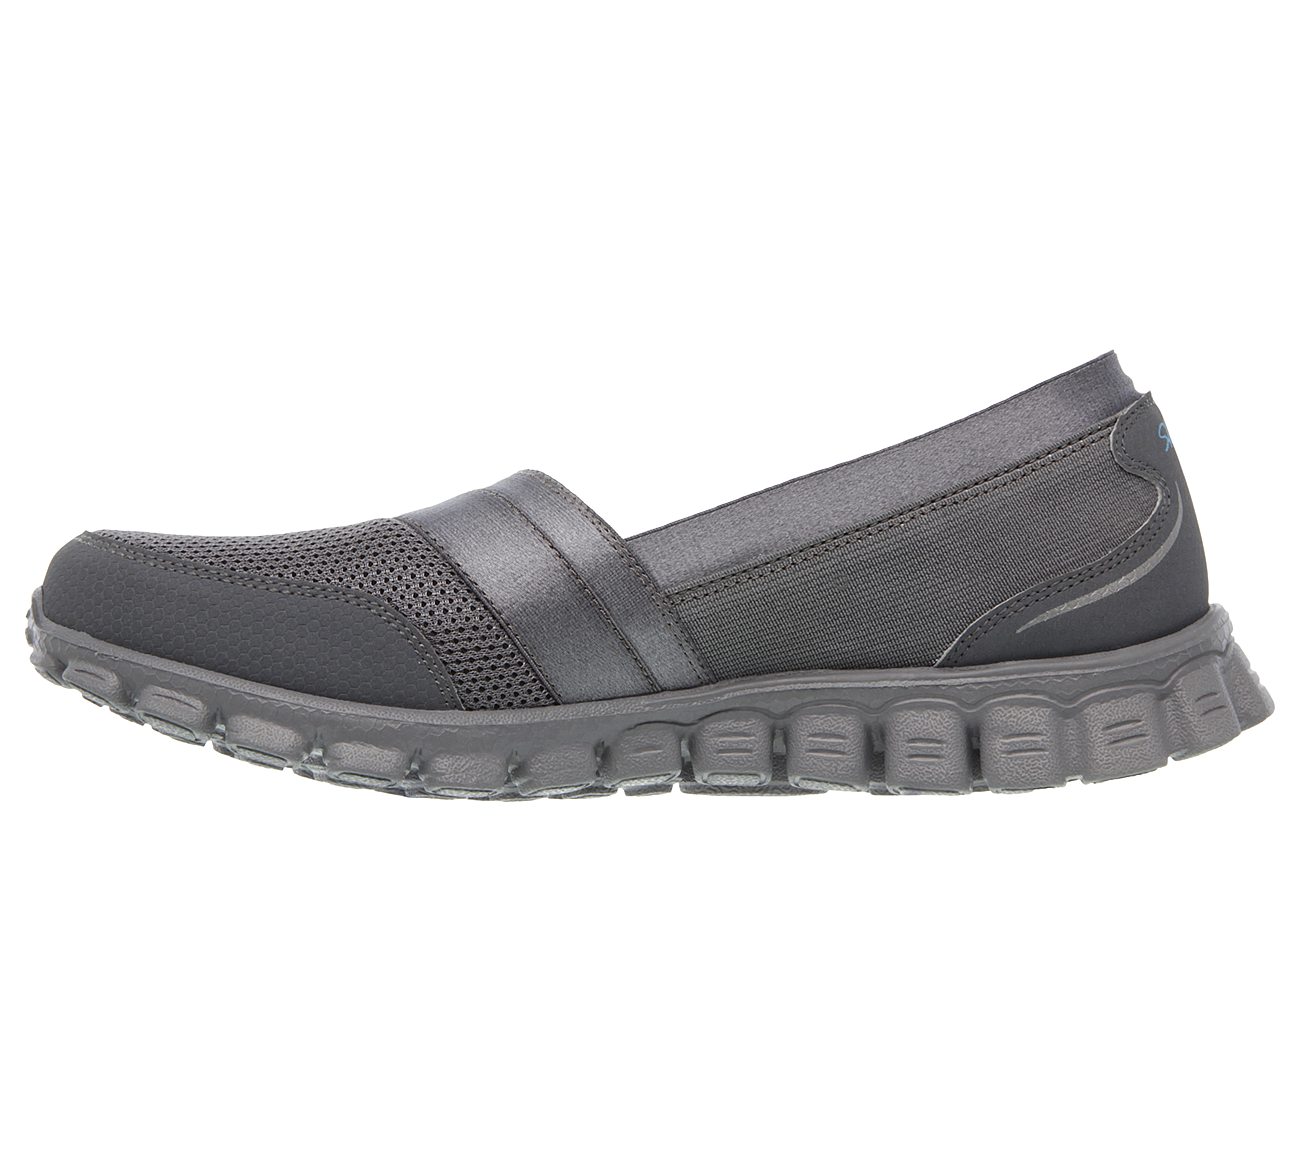 skechers women's ez flex 2 quipster casual sneakers from finish line